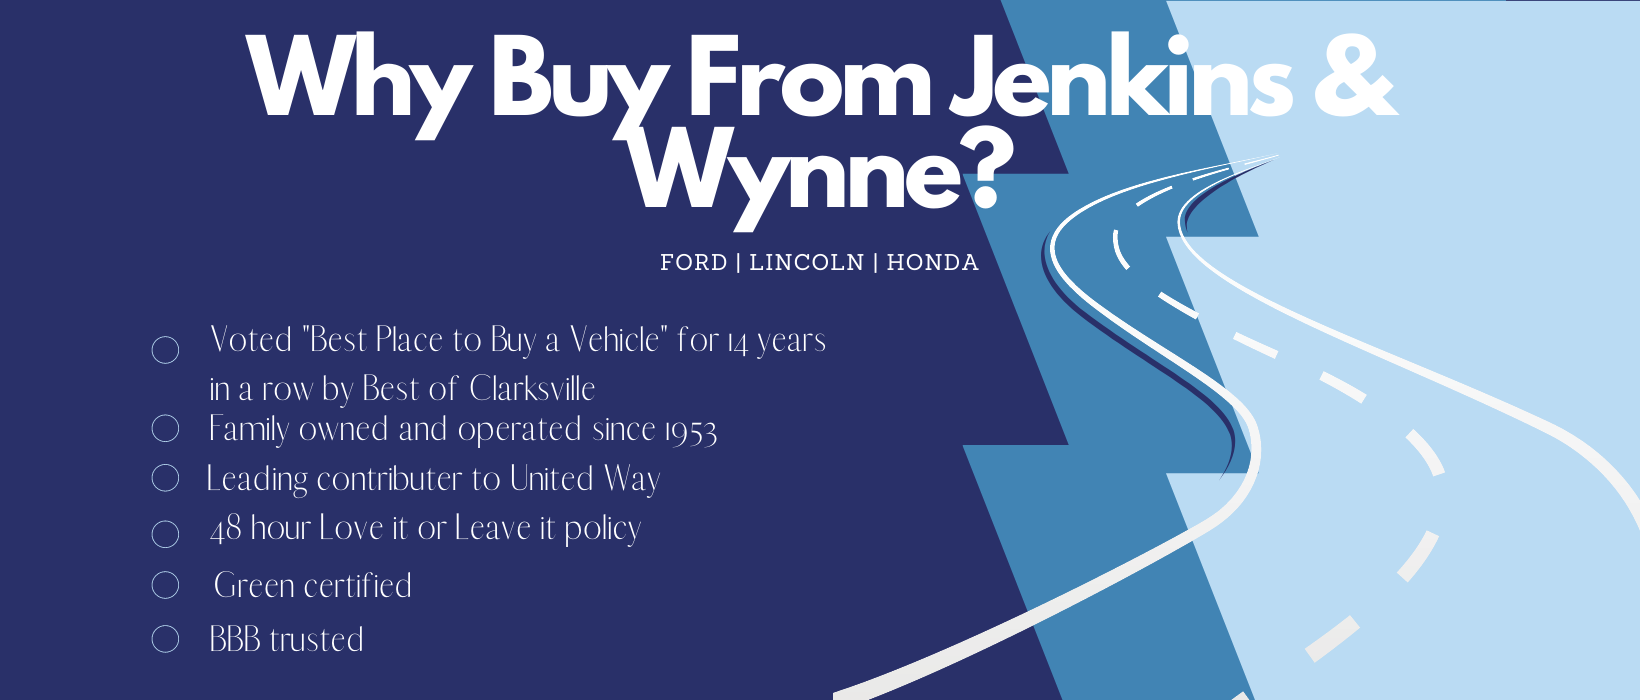 Why-Buy-From-Jenkins-Wynne-Banner-1640-x-900-px-1640-x-800-px-1640-x-700-px